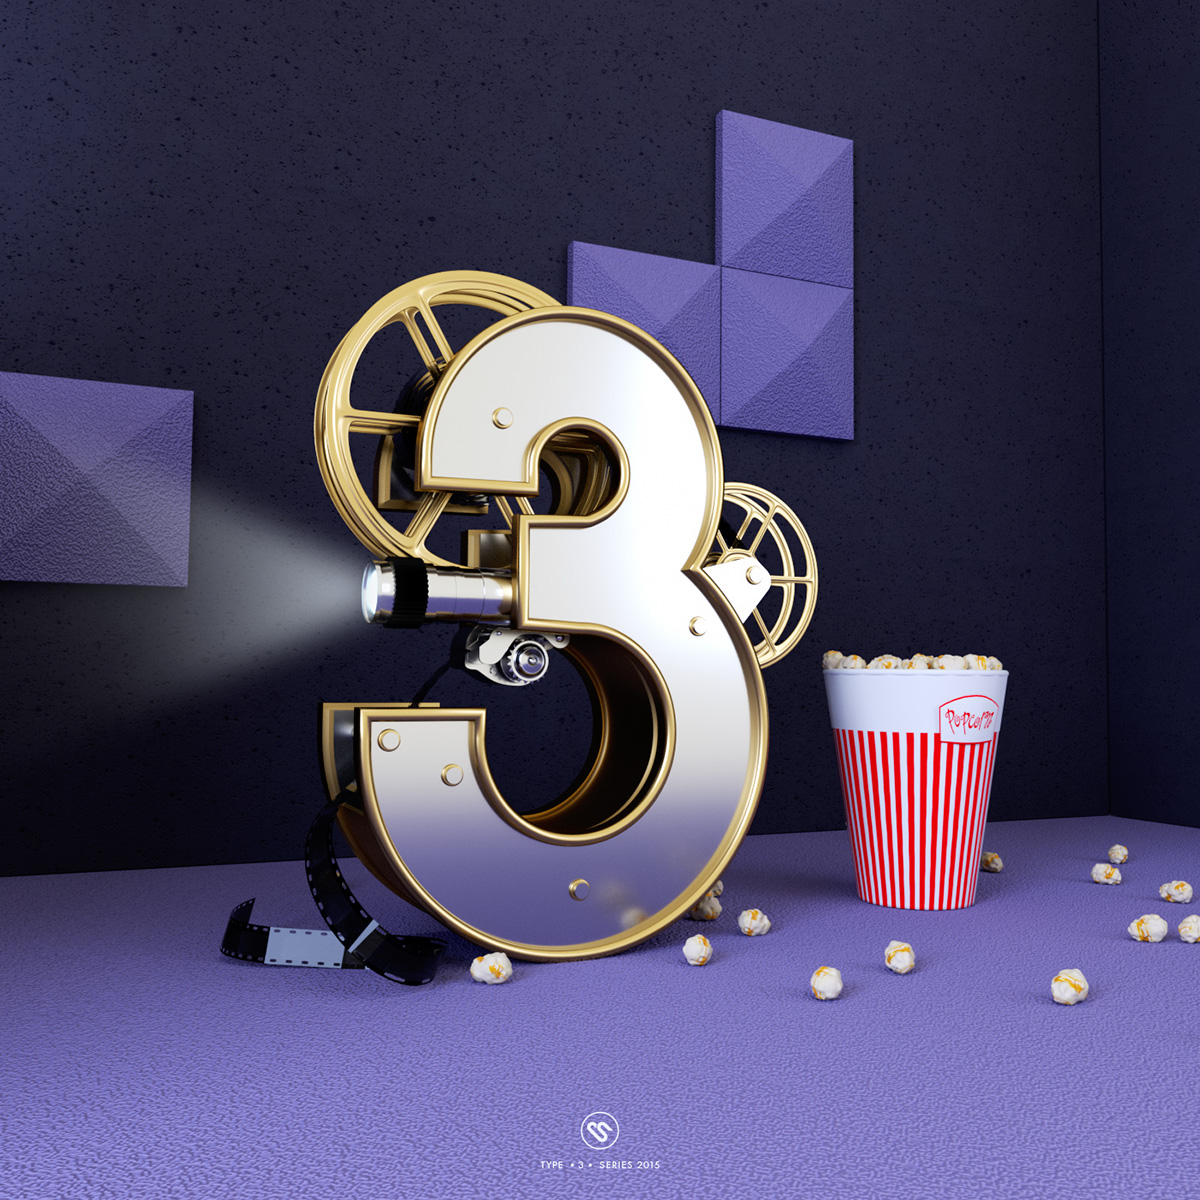 3D Type 3D illustration design colors abstract Ps25Under25 texture numbers type Render vray octane 36daysoftype